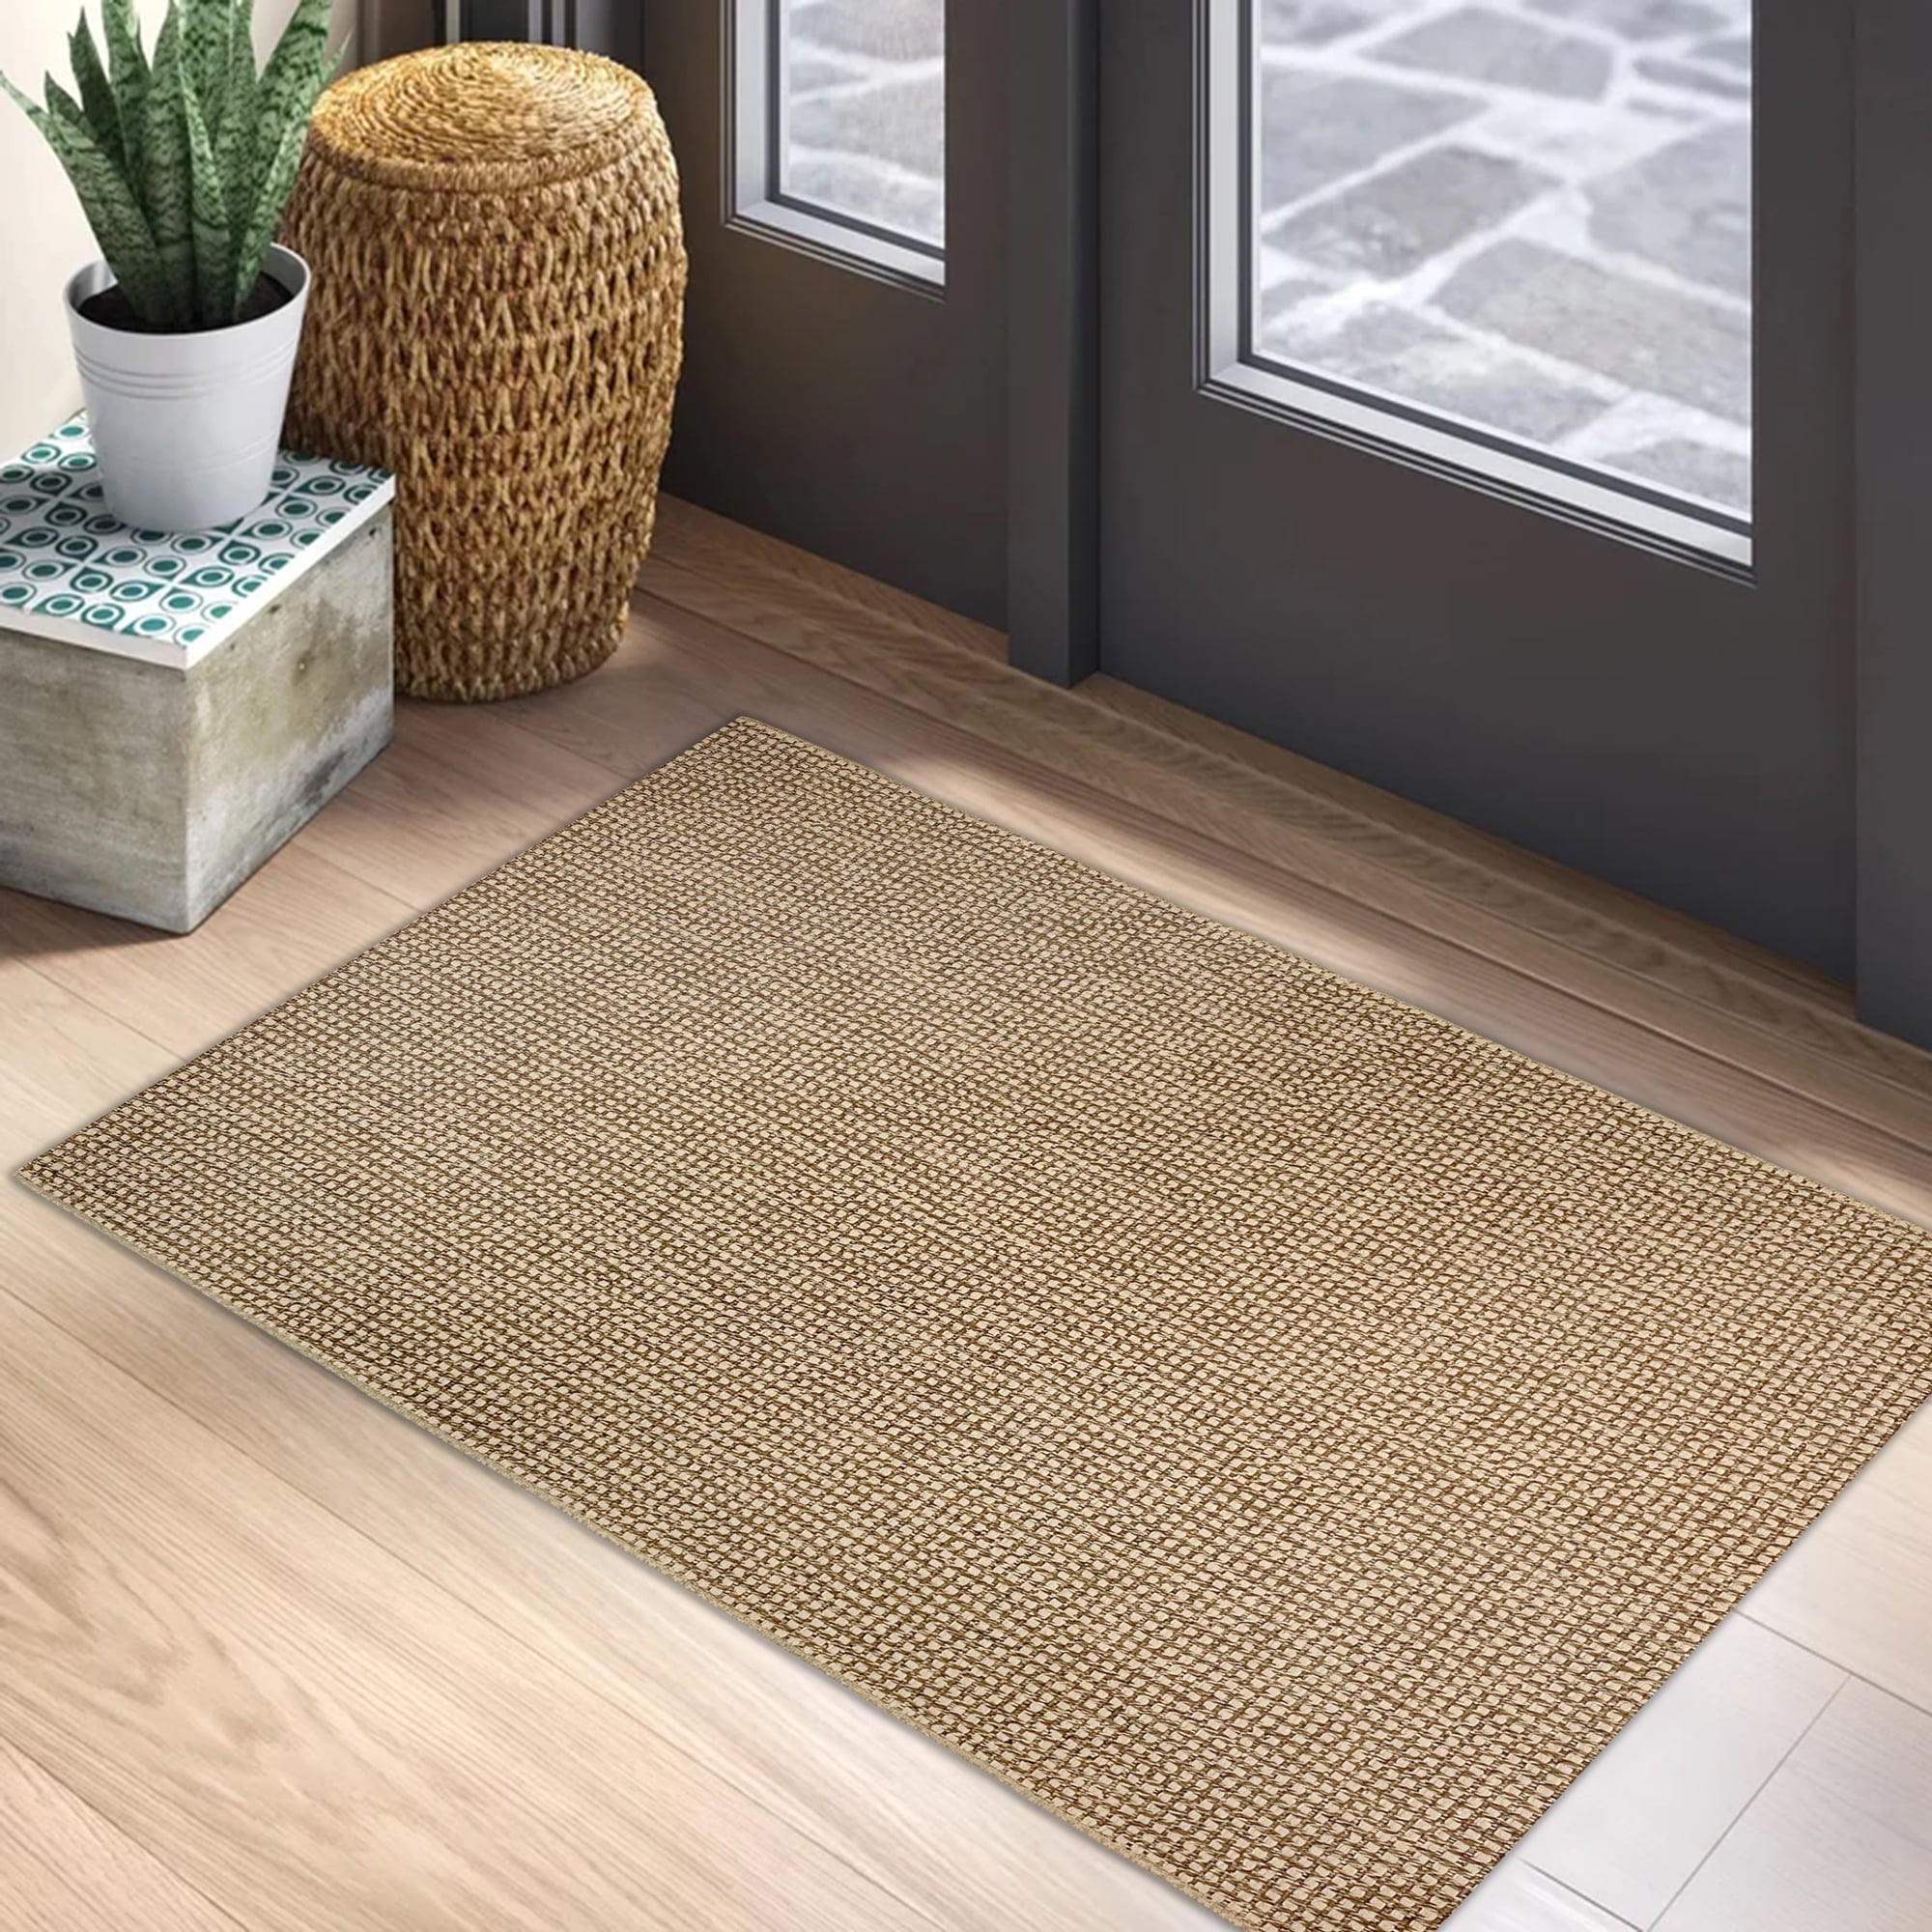 How To Get a Rug To Lay Flat – Tumble